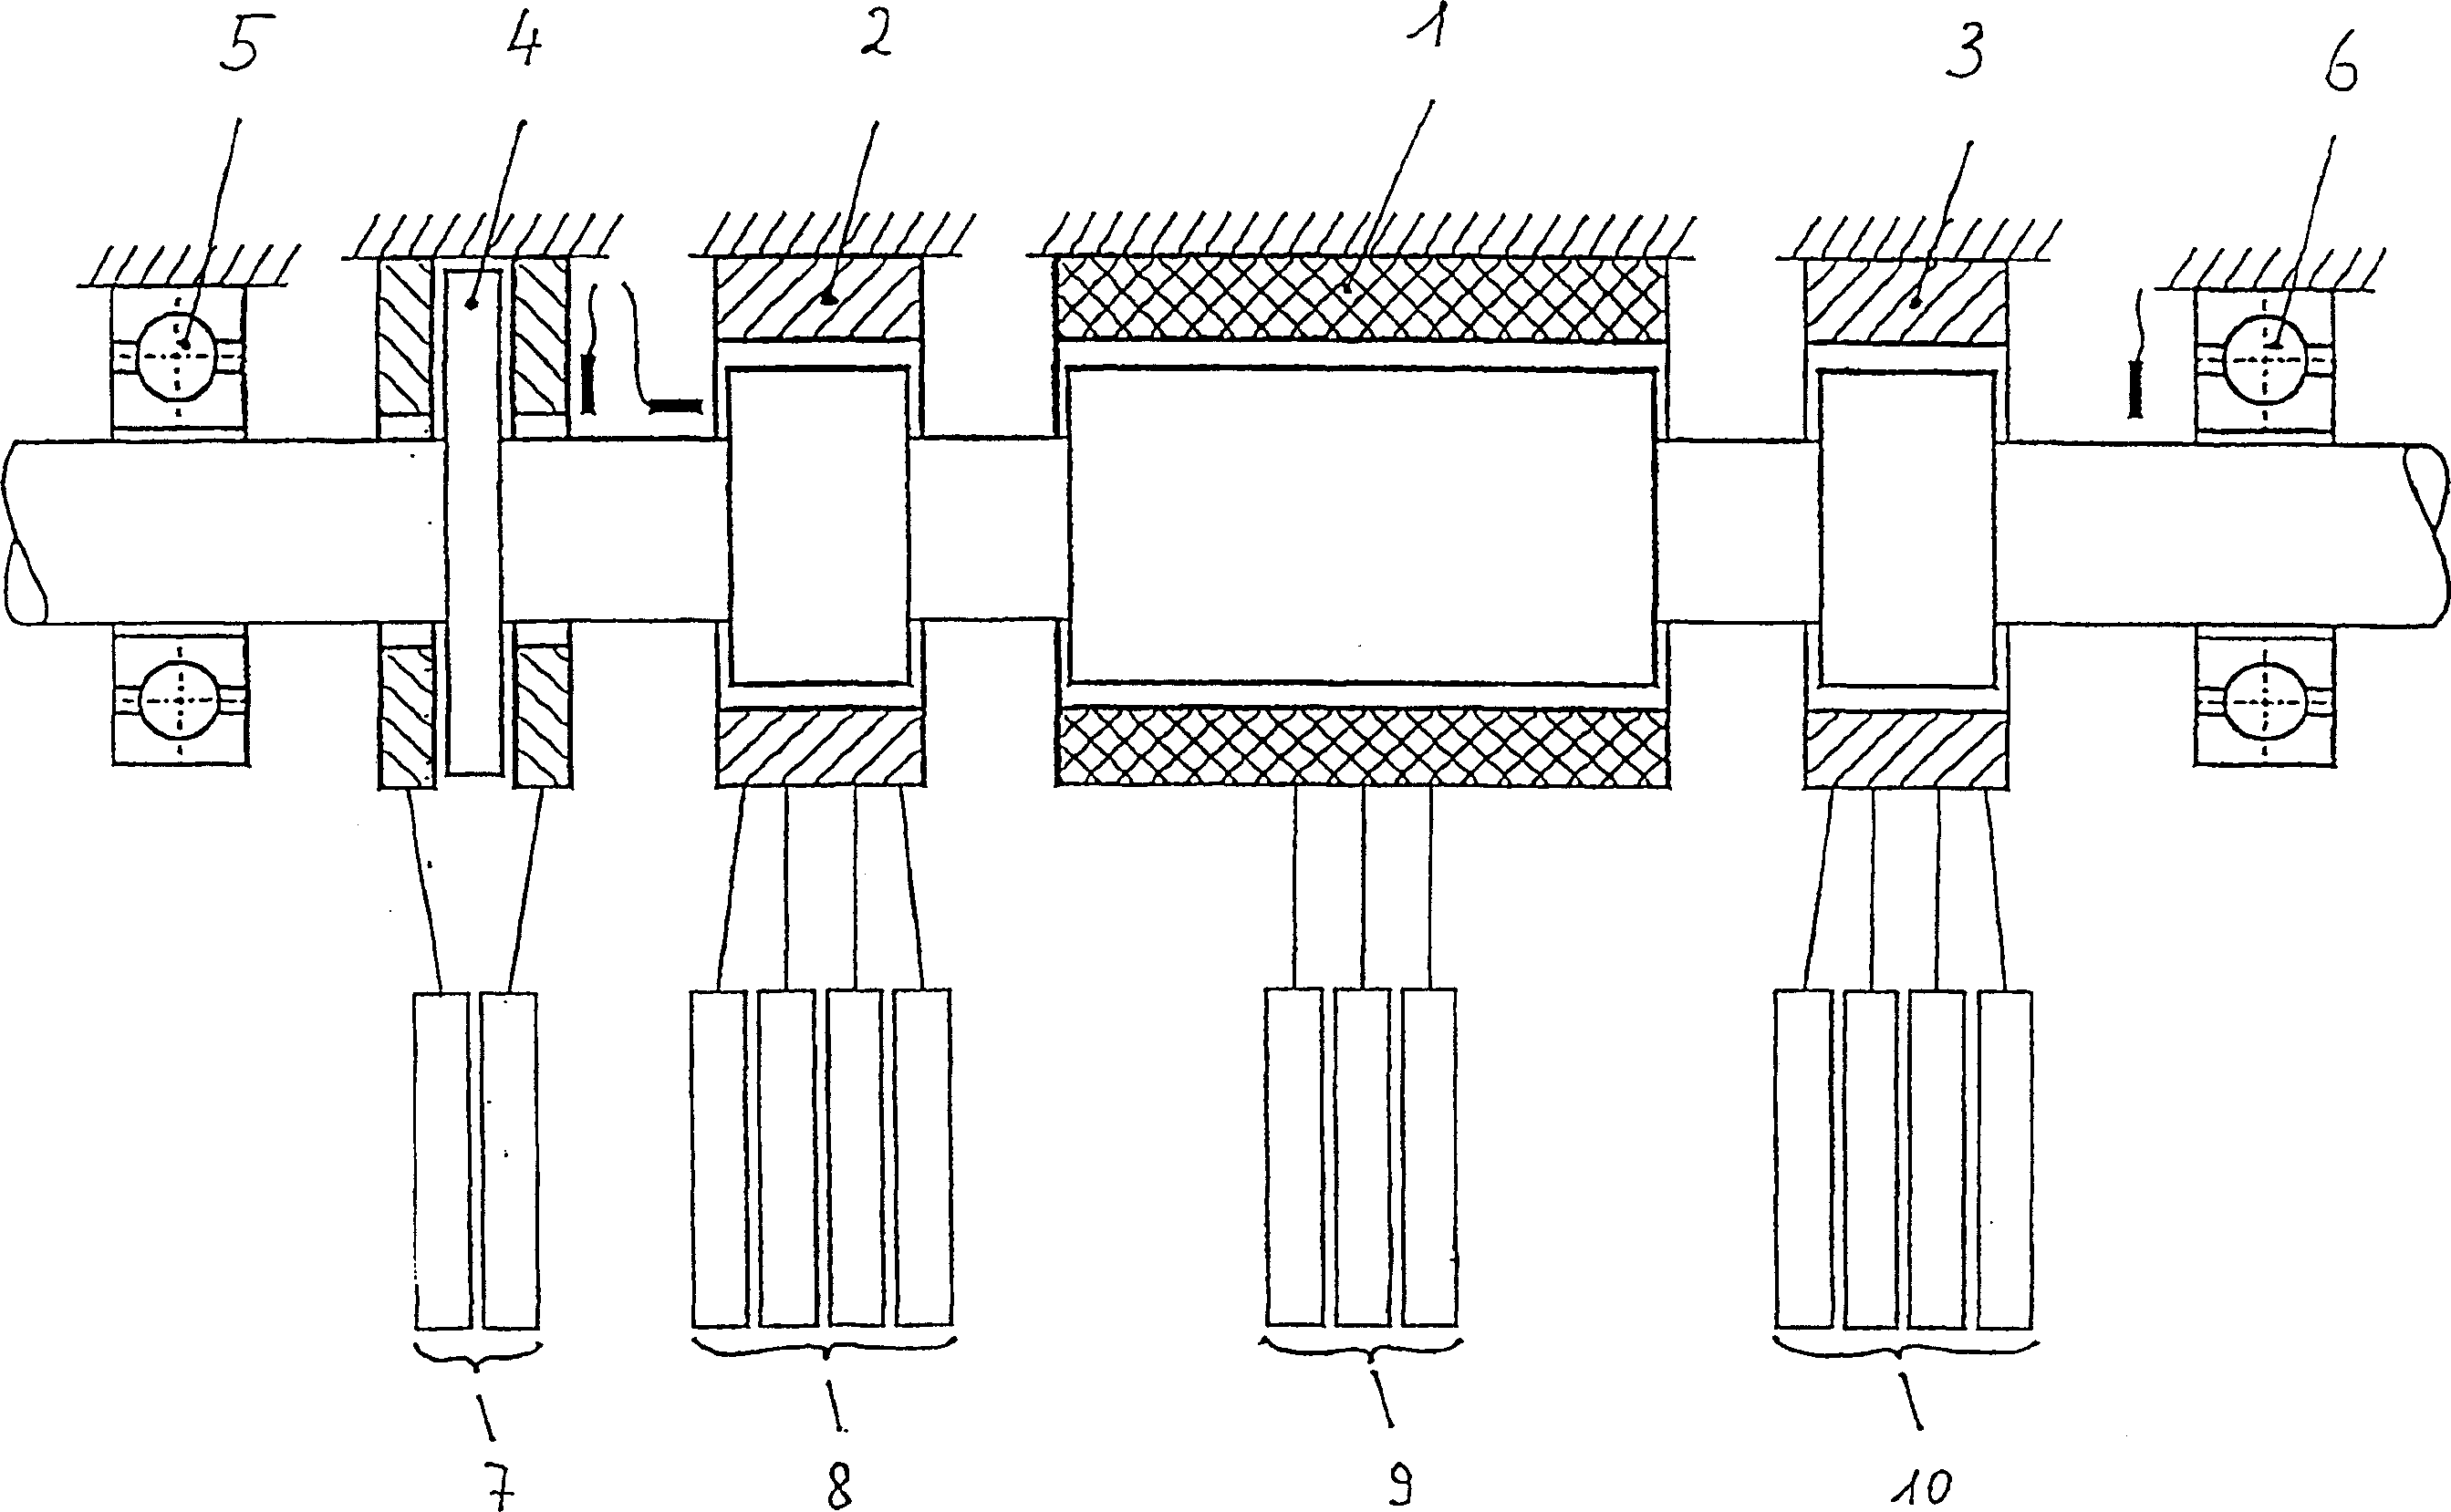 Magnetic support electrical drive device